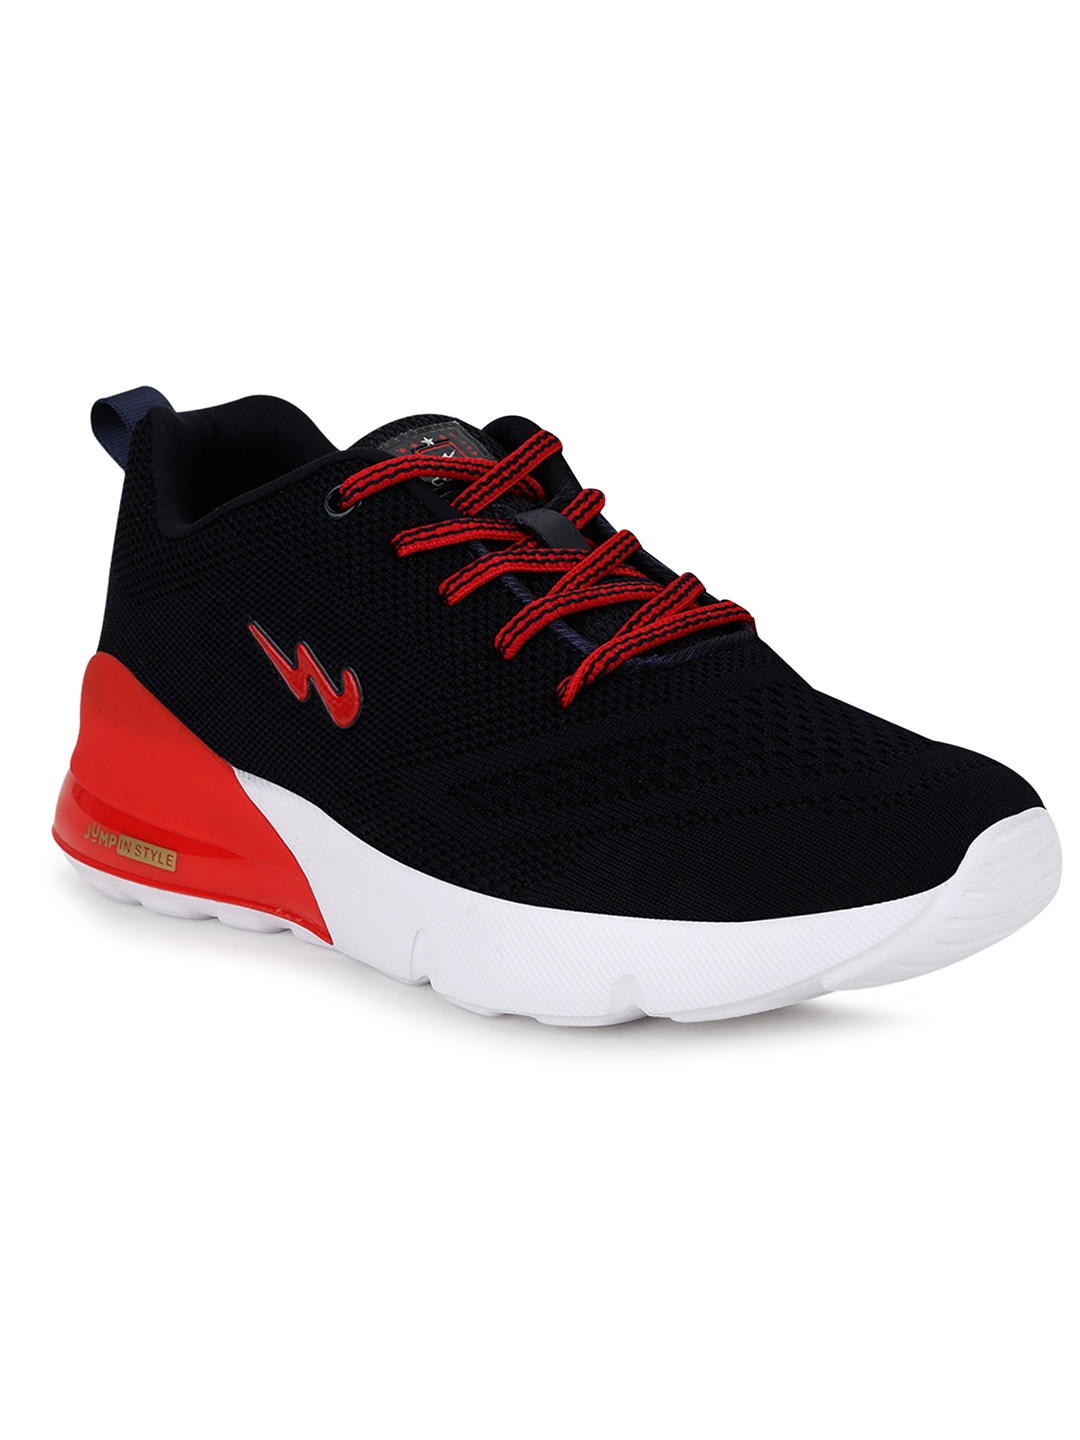 Campus Shoes | Black Running Shoes